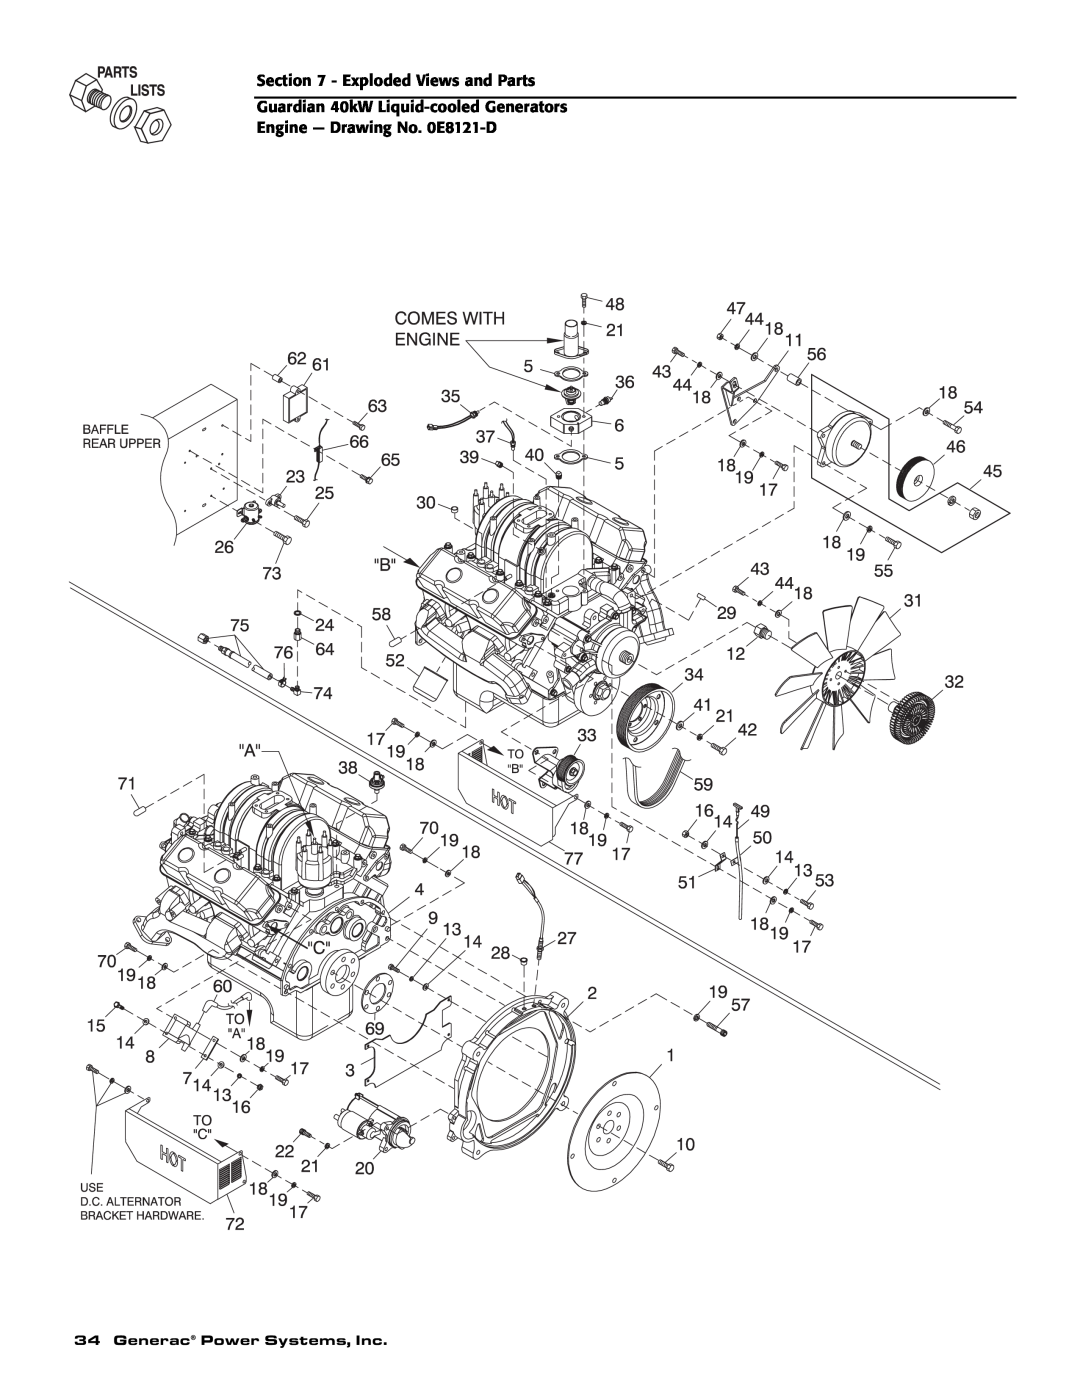 Generac Power Systems 004992-1, 004992-0, 004992-0, 004992-1 Exploded Views and Parts, Generac Power Systems, Inc 